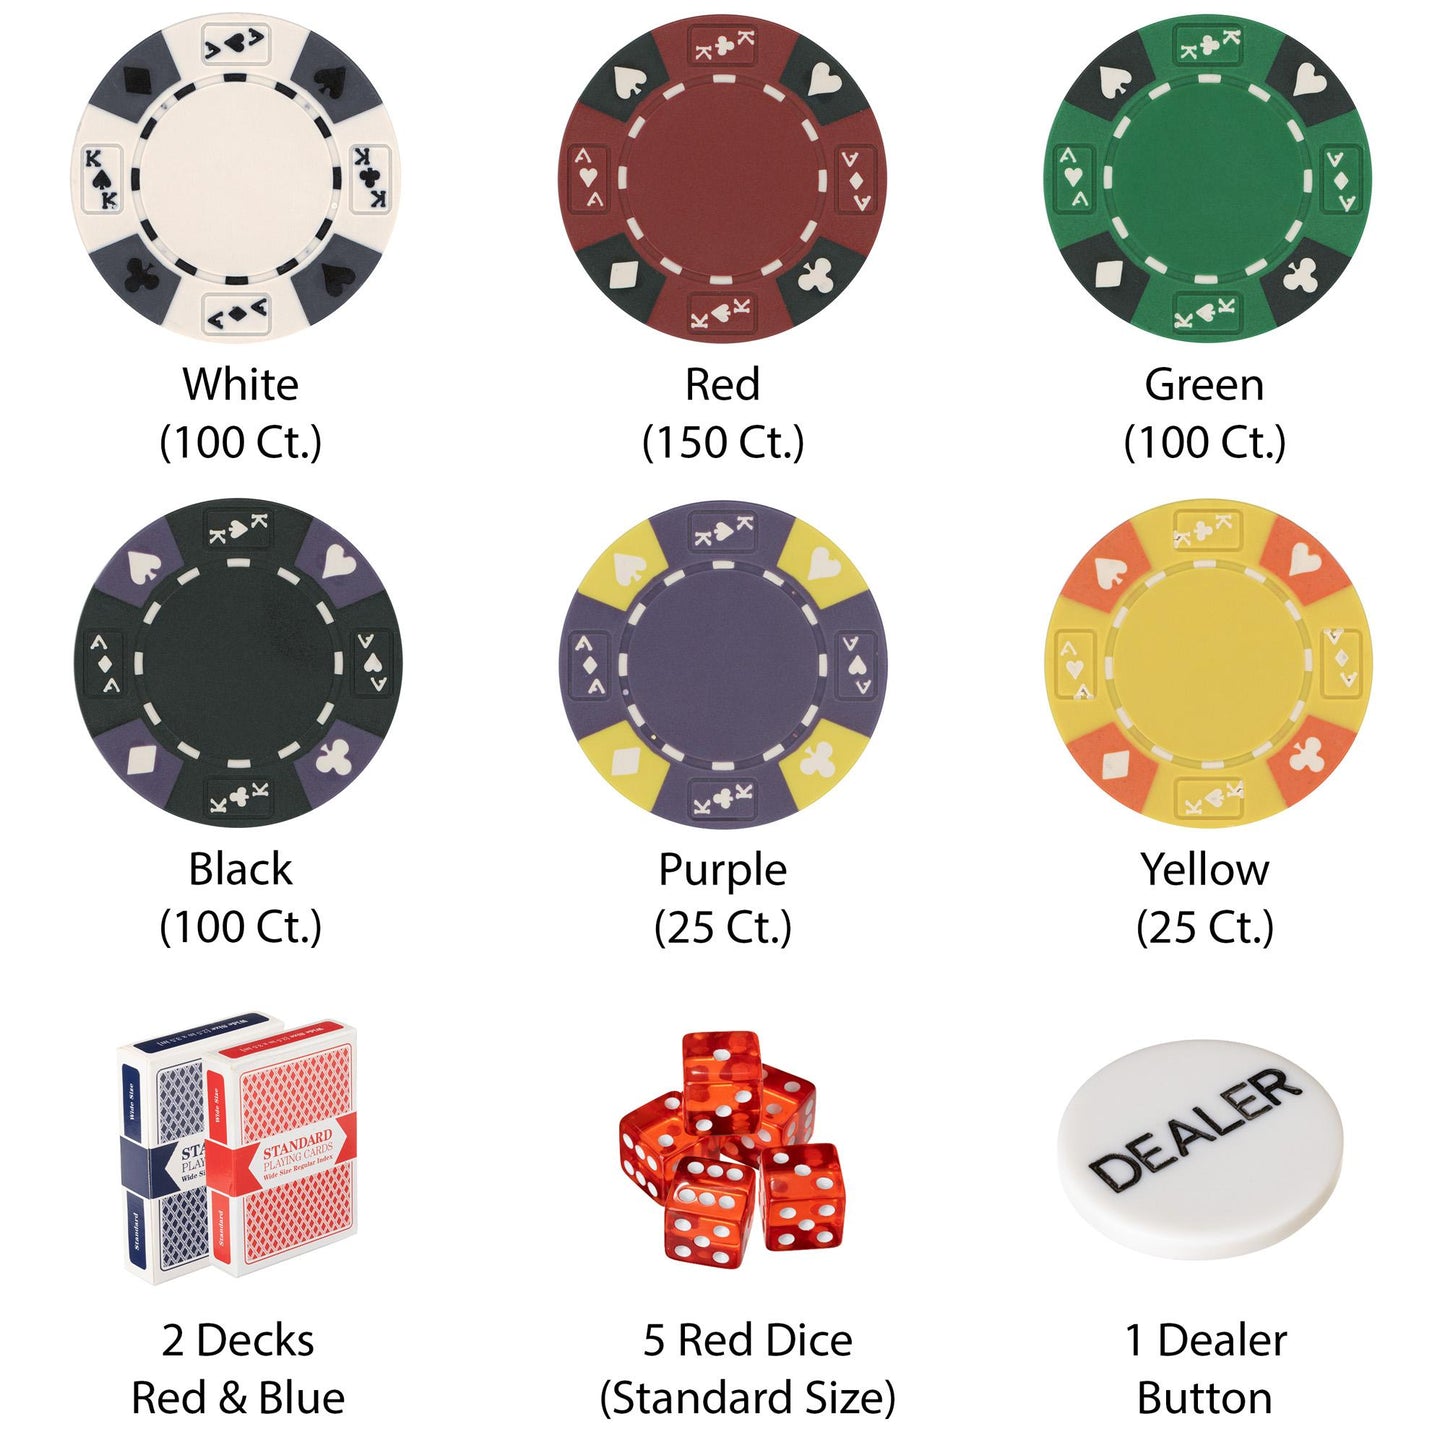 500 Ace King Suited Poker Chips with Aluminum Case